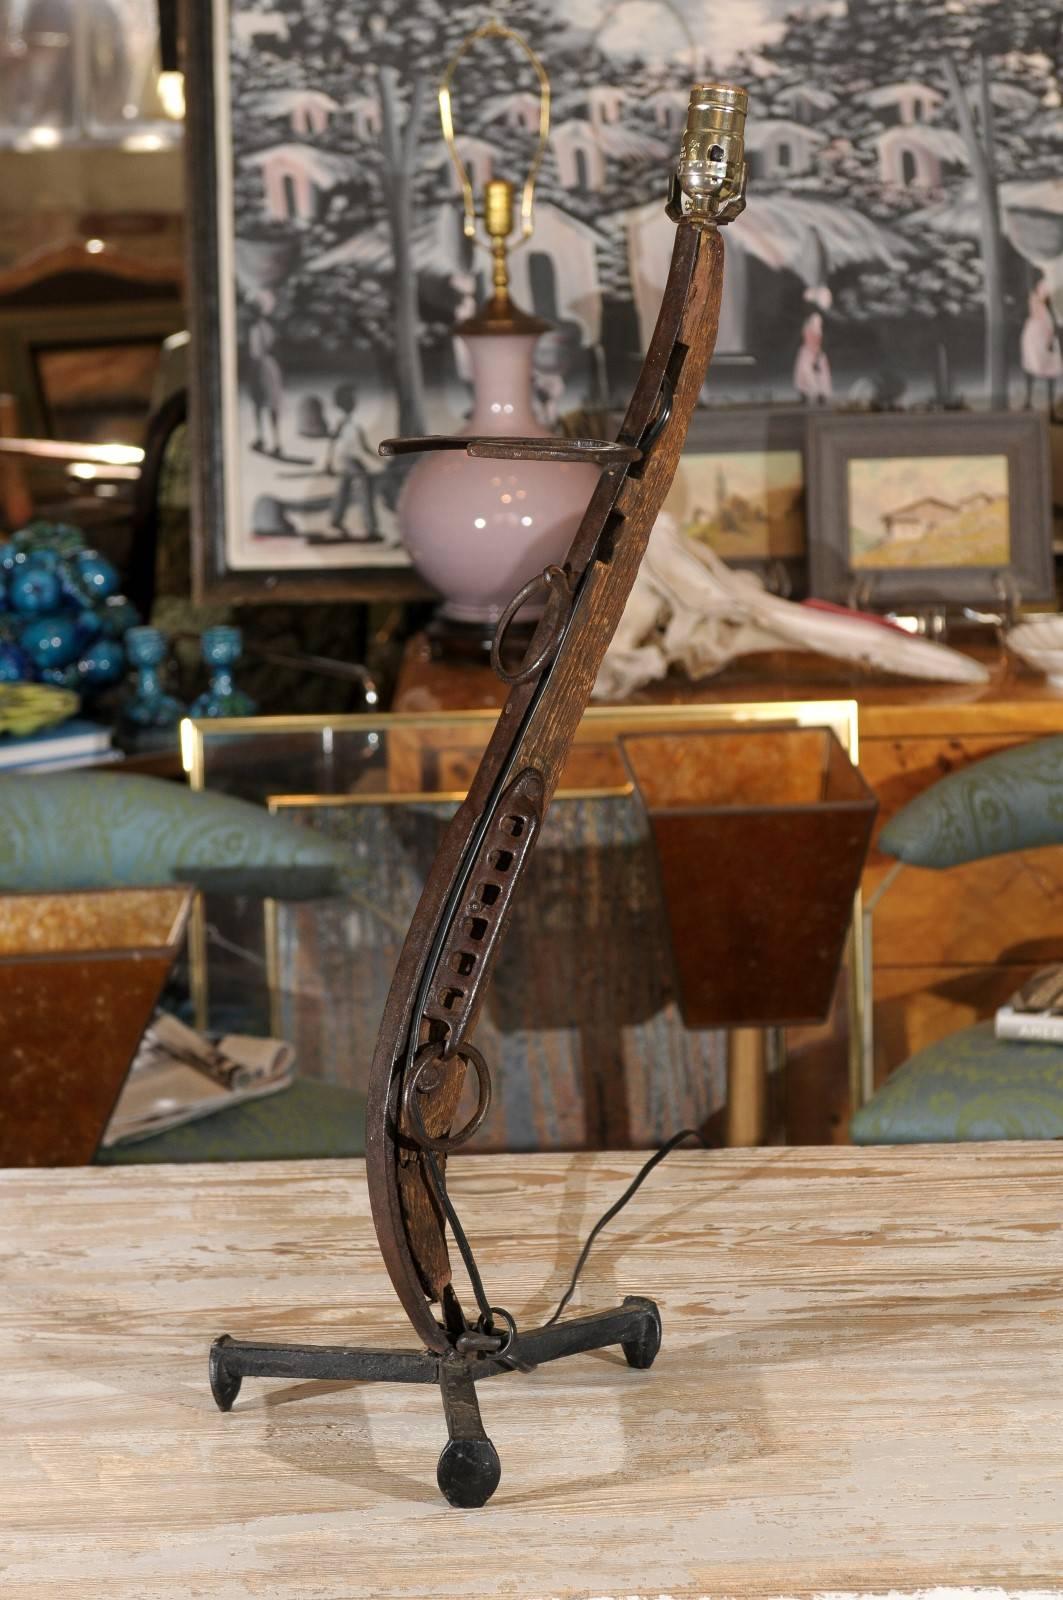 Vintage Folk Art table lamp handmade in the shape of a gun/ rifle using driftwood and wrought iron and having an antique horseshoe mounted as the front sight.